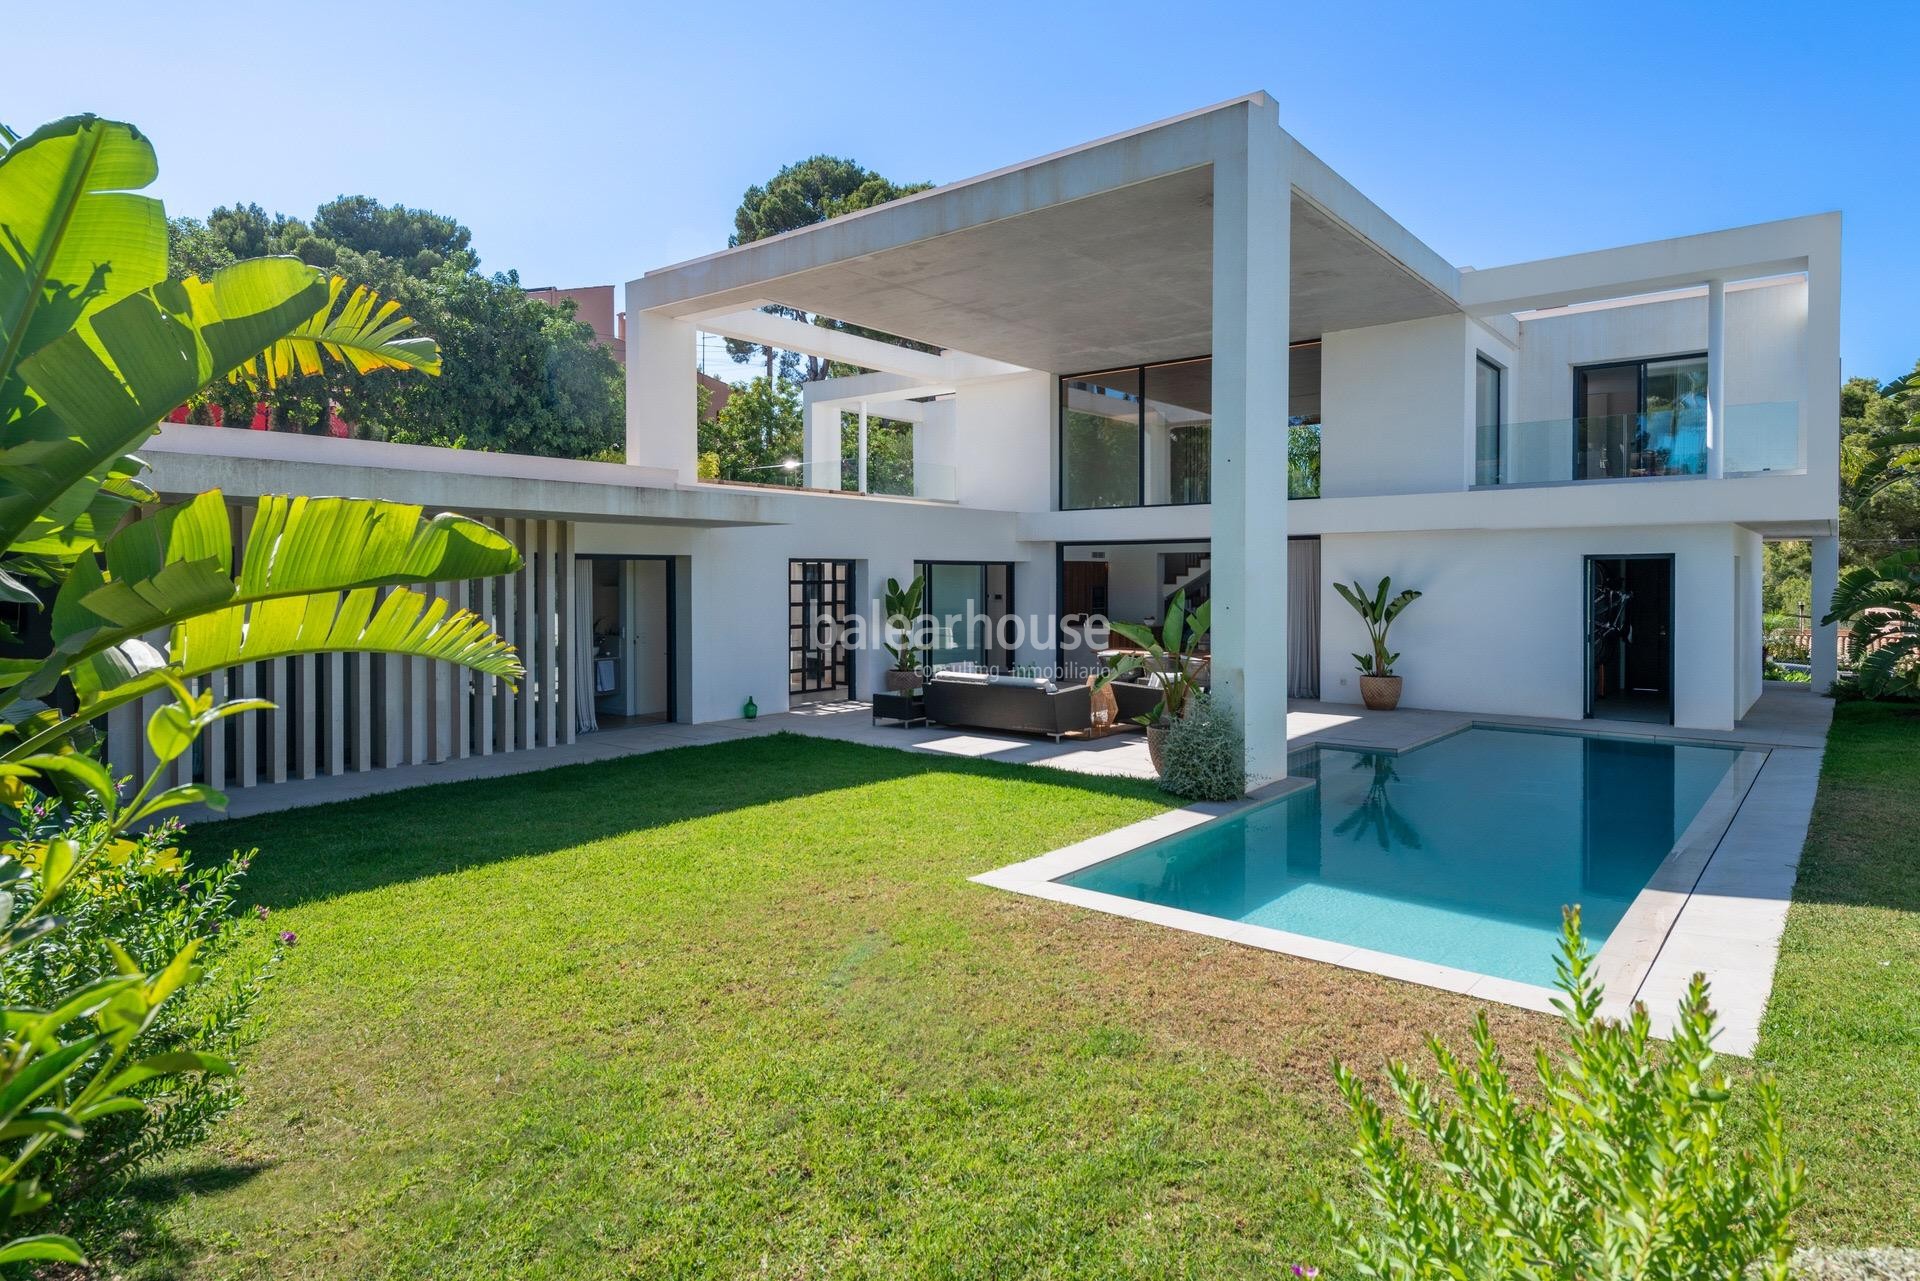 Design, light and comfort in this villa with large outdoor spaces near the beach in Santa Ponsa